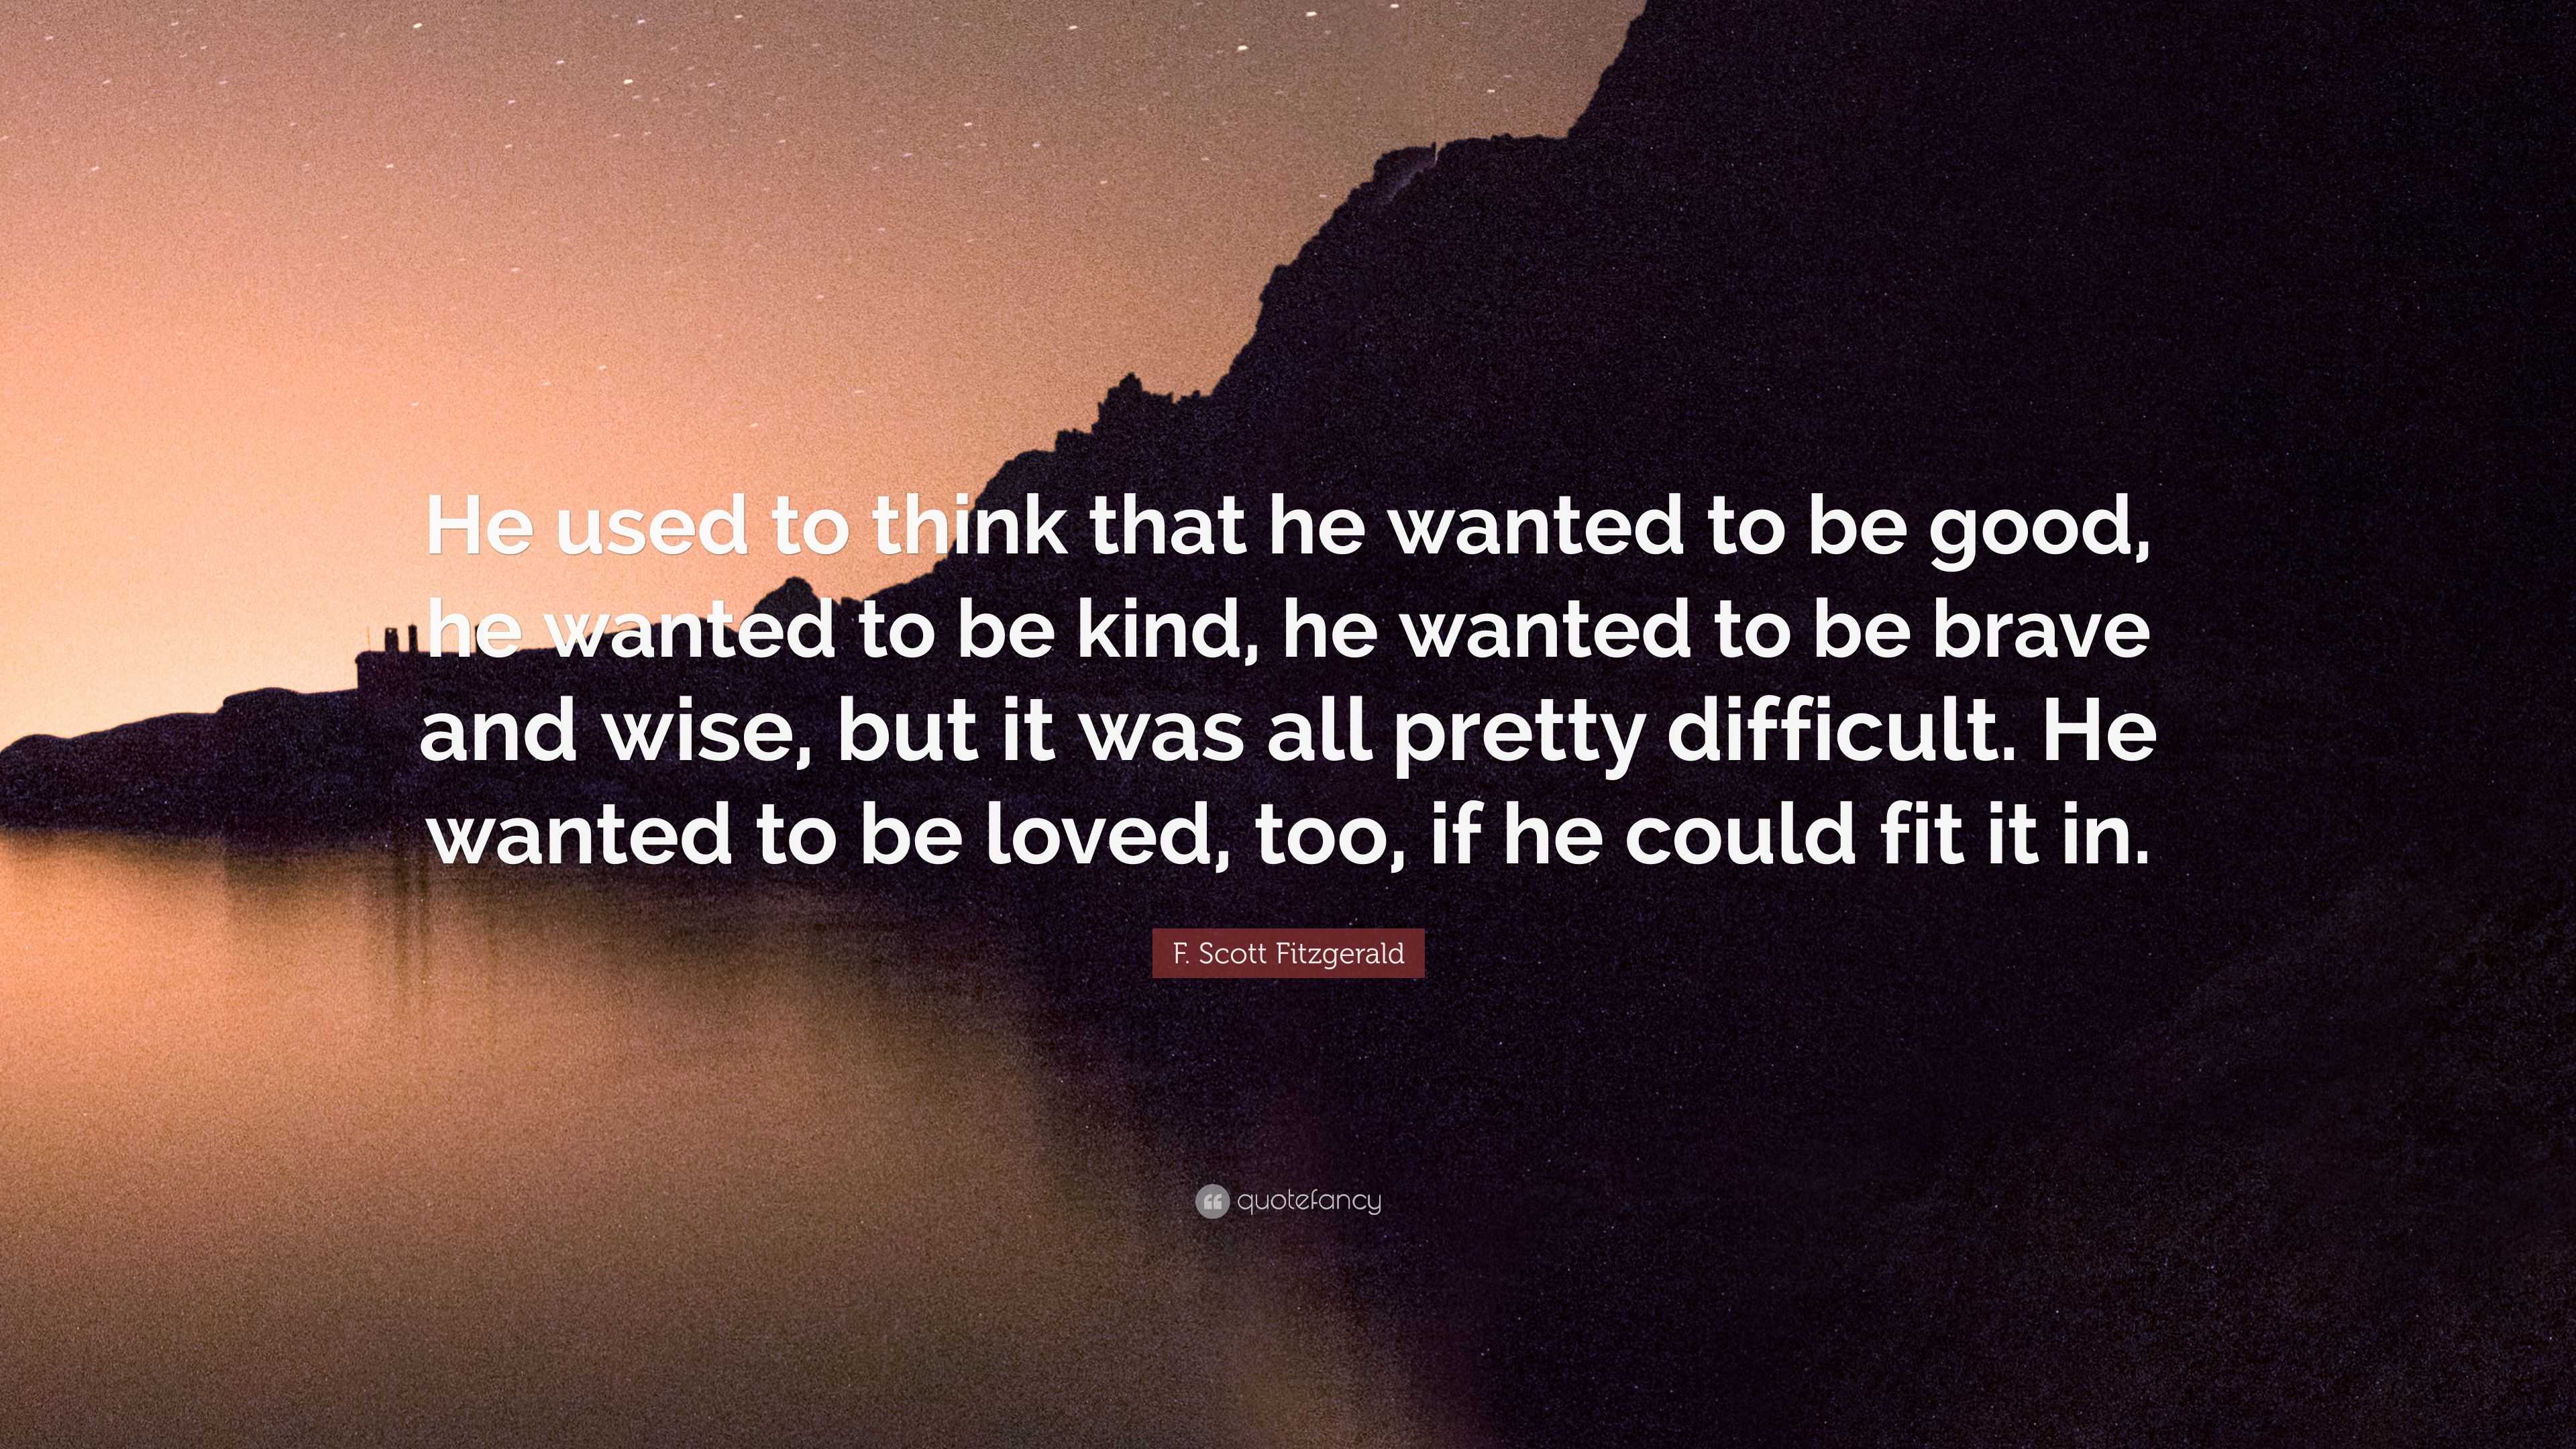 F. Scott Fitzgerald Quote: “He used to think that he wanted to be good, he wanted to be kind, he wanted to be and wise, but it was all pretty ...”